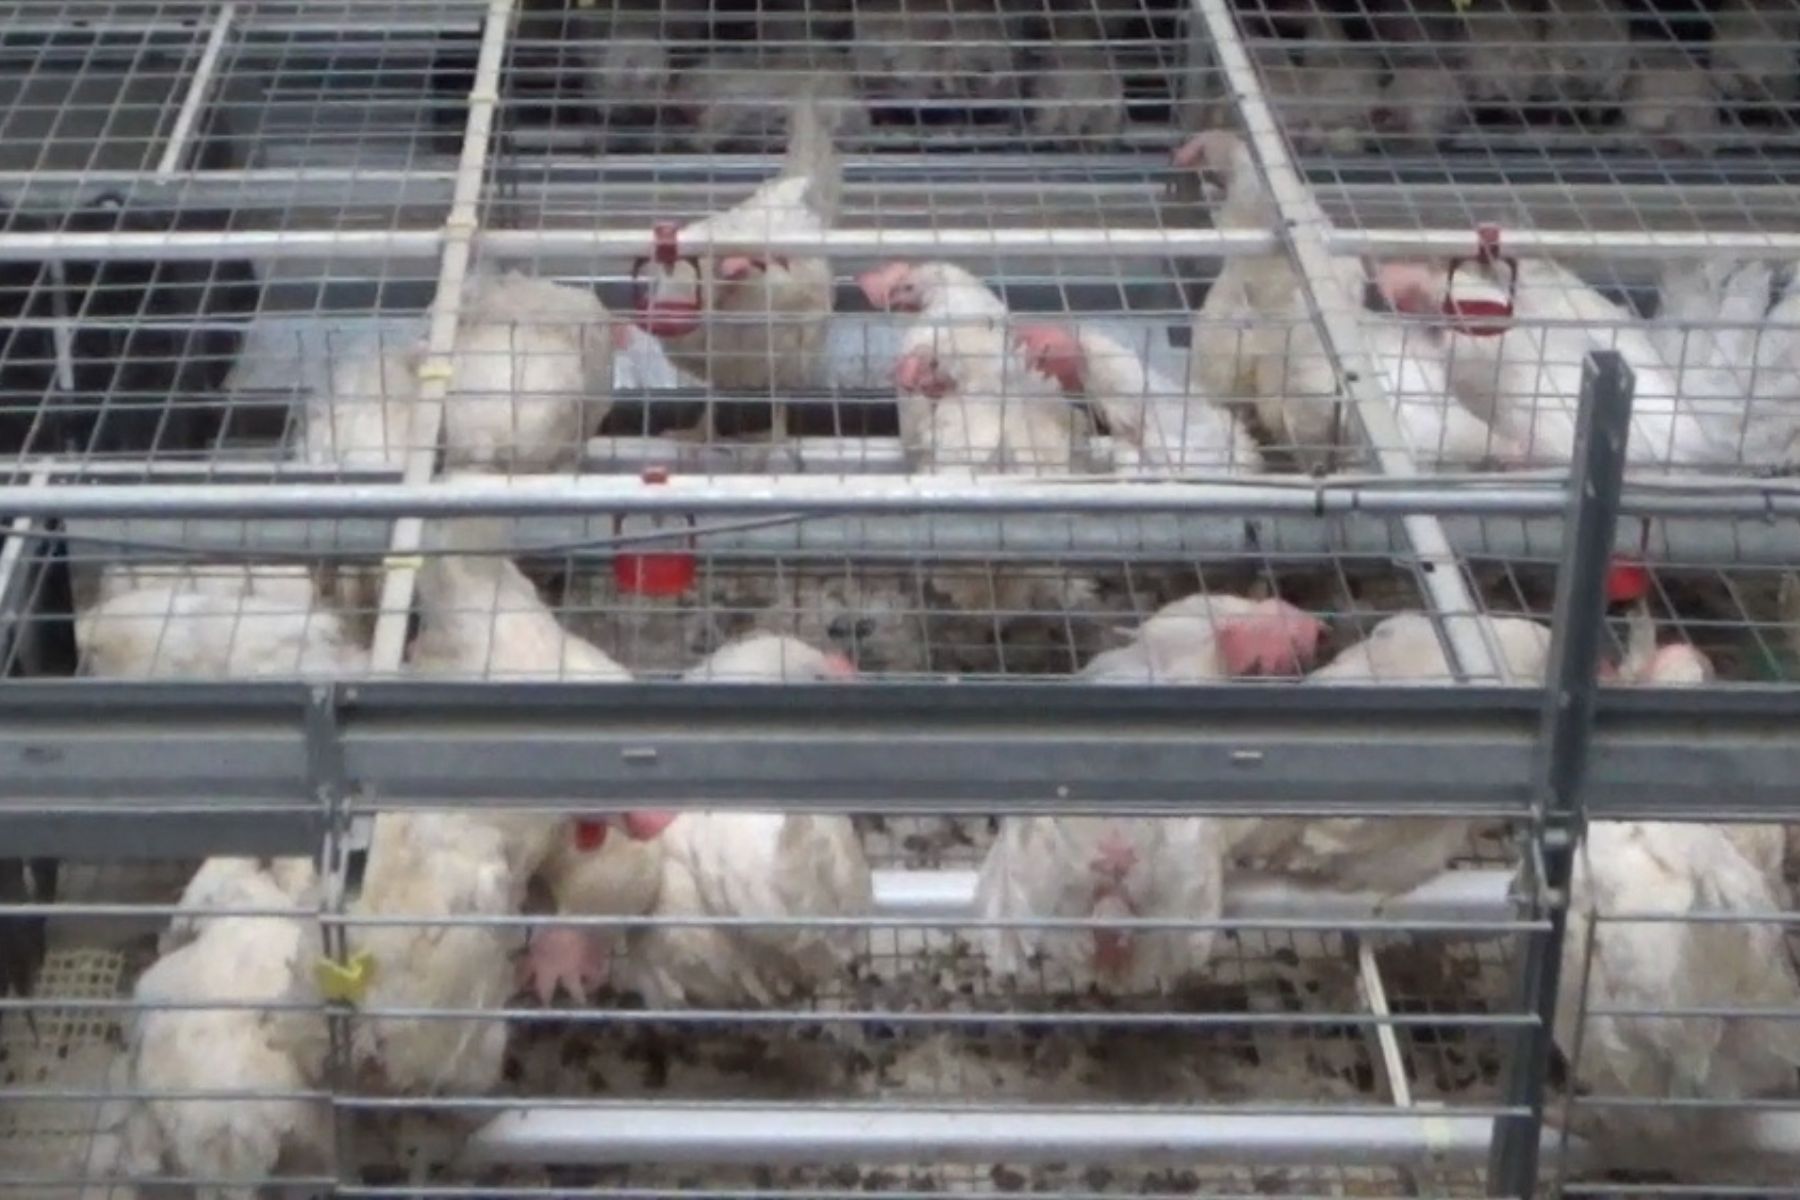 Egg-laying hens in cages.